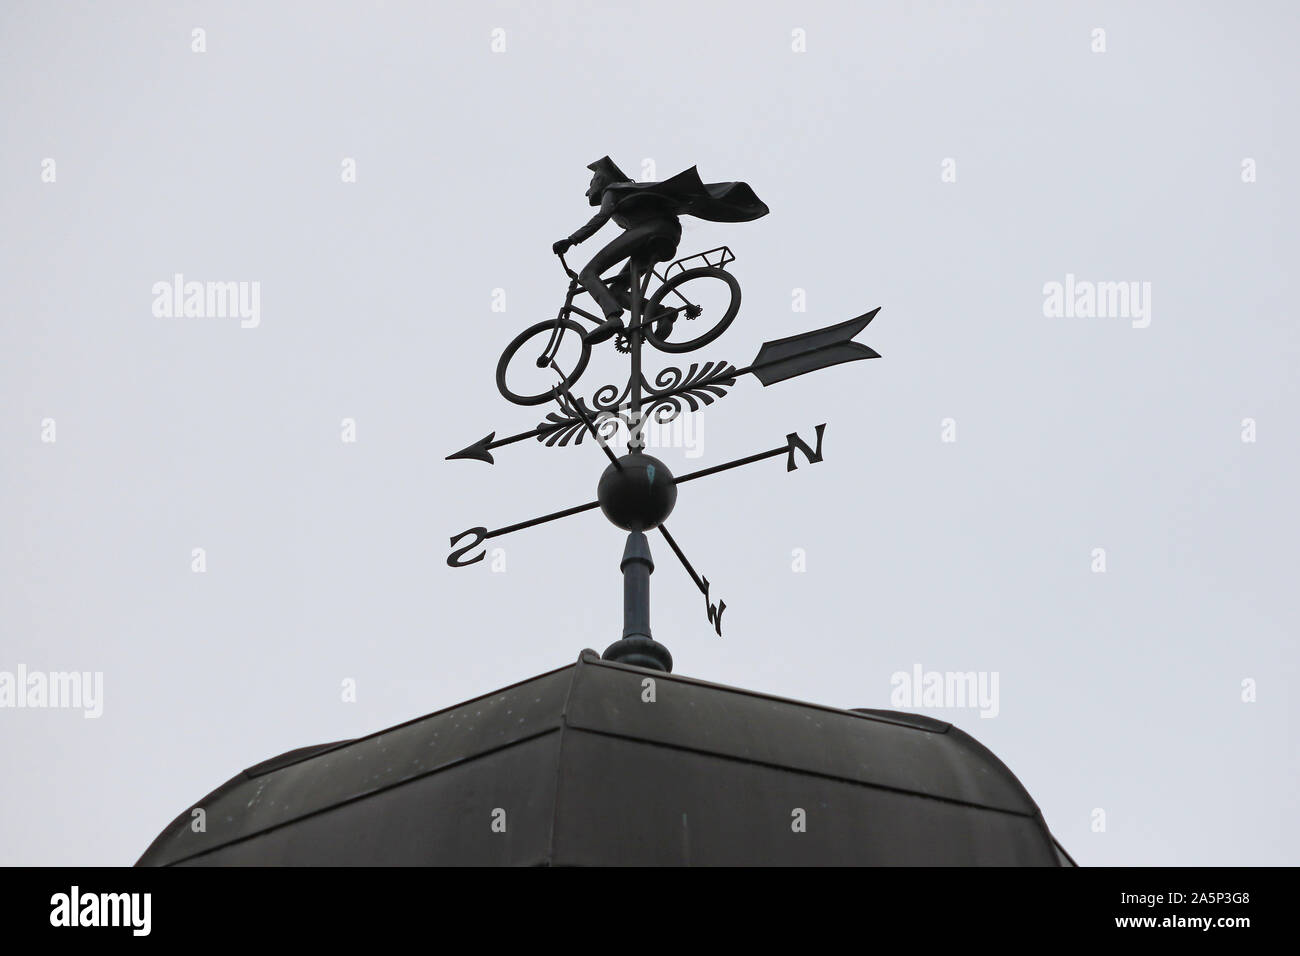 contemporary weather vane part of Harris Manchester college called the Siew-Sngiem clock tower designed by Yiangou Architects 2014 in classical style Stock Photo